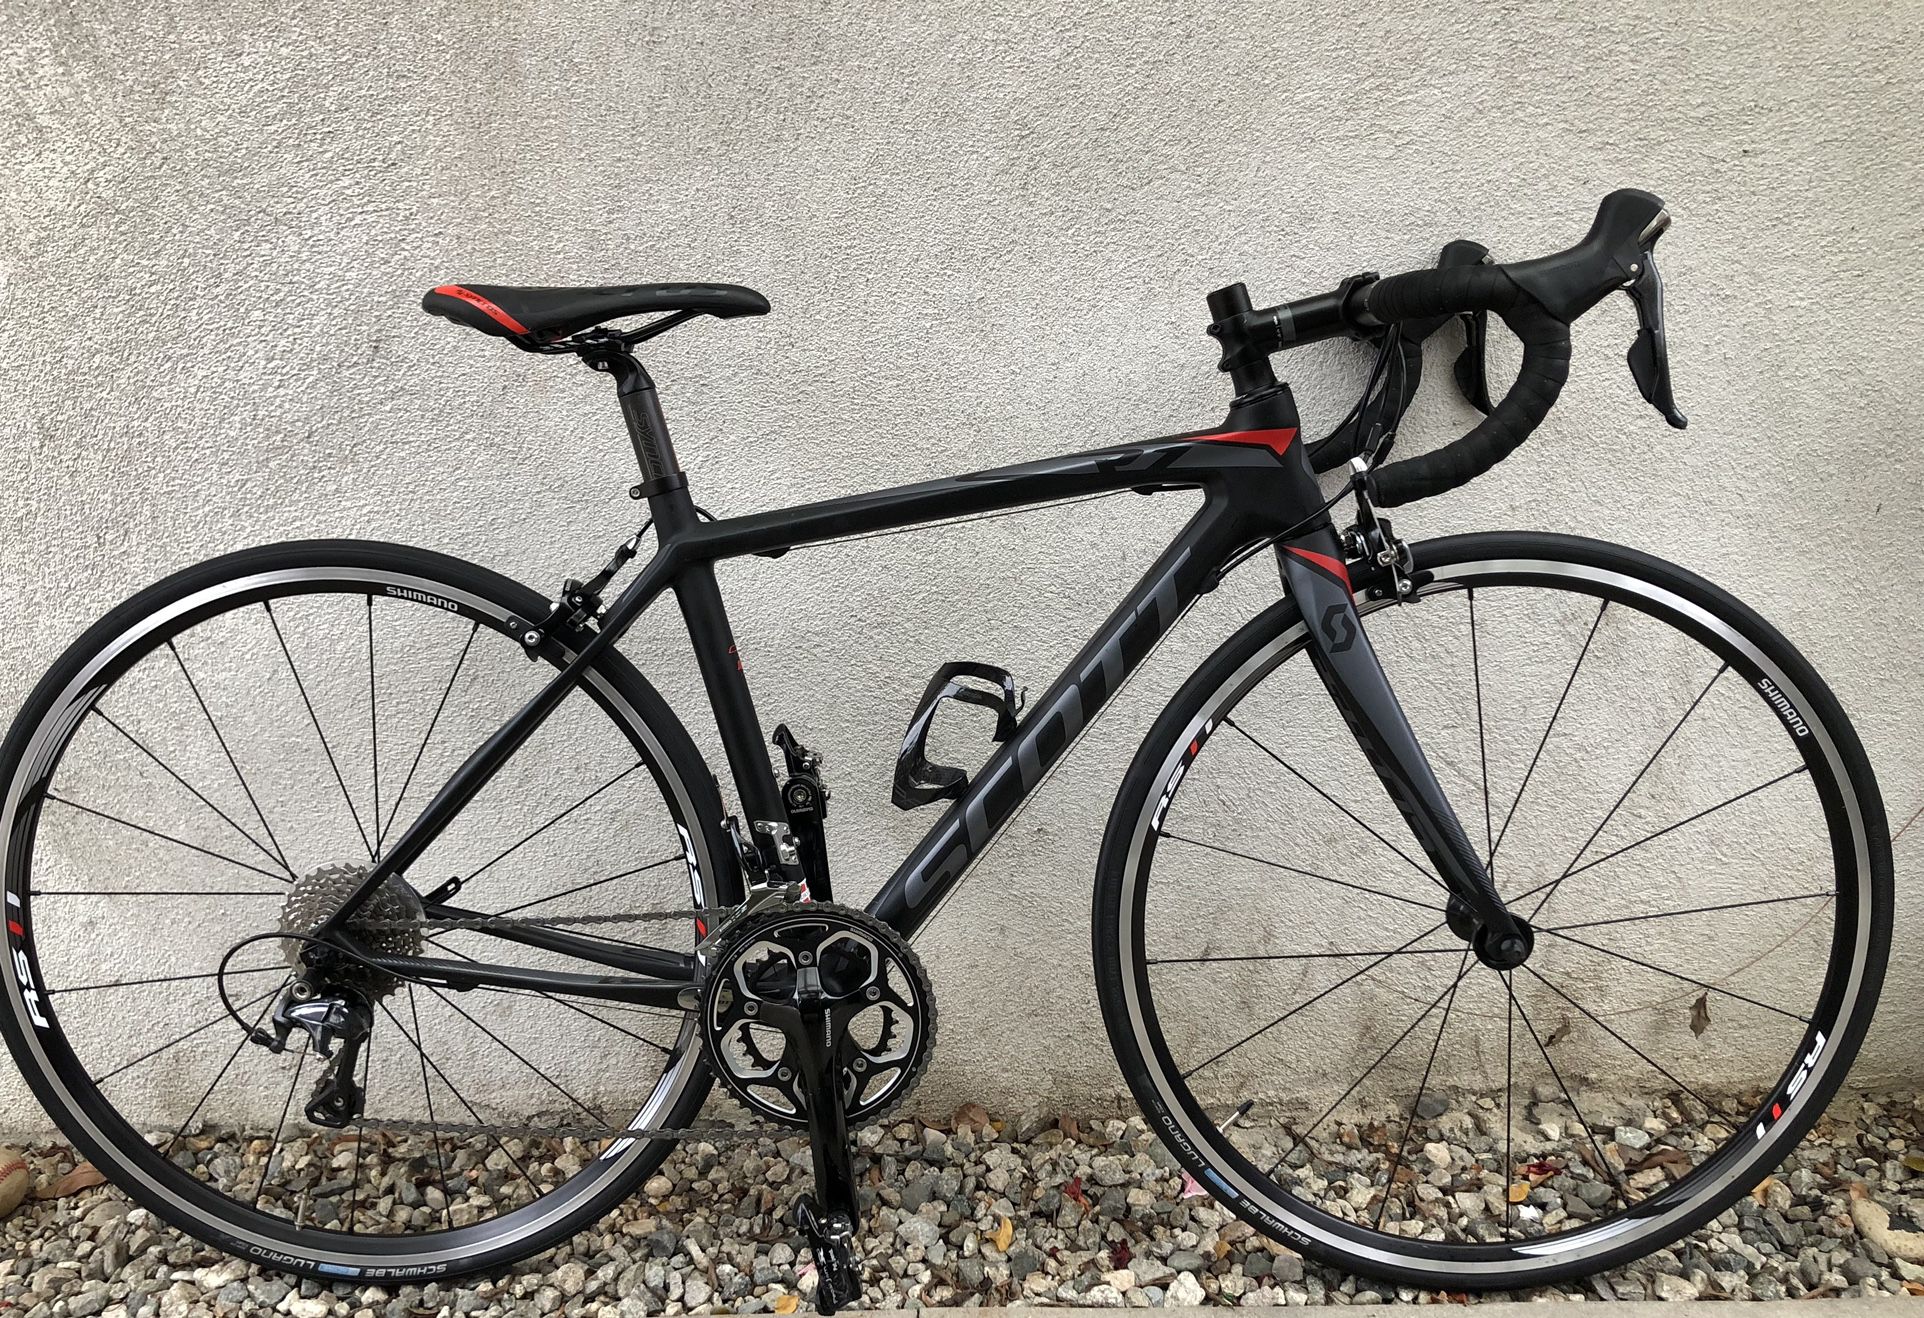 Scott CR1 full carbon road bike size 47cm XXS. Looks and rides great. $800 Firm